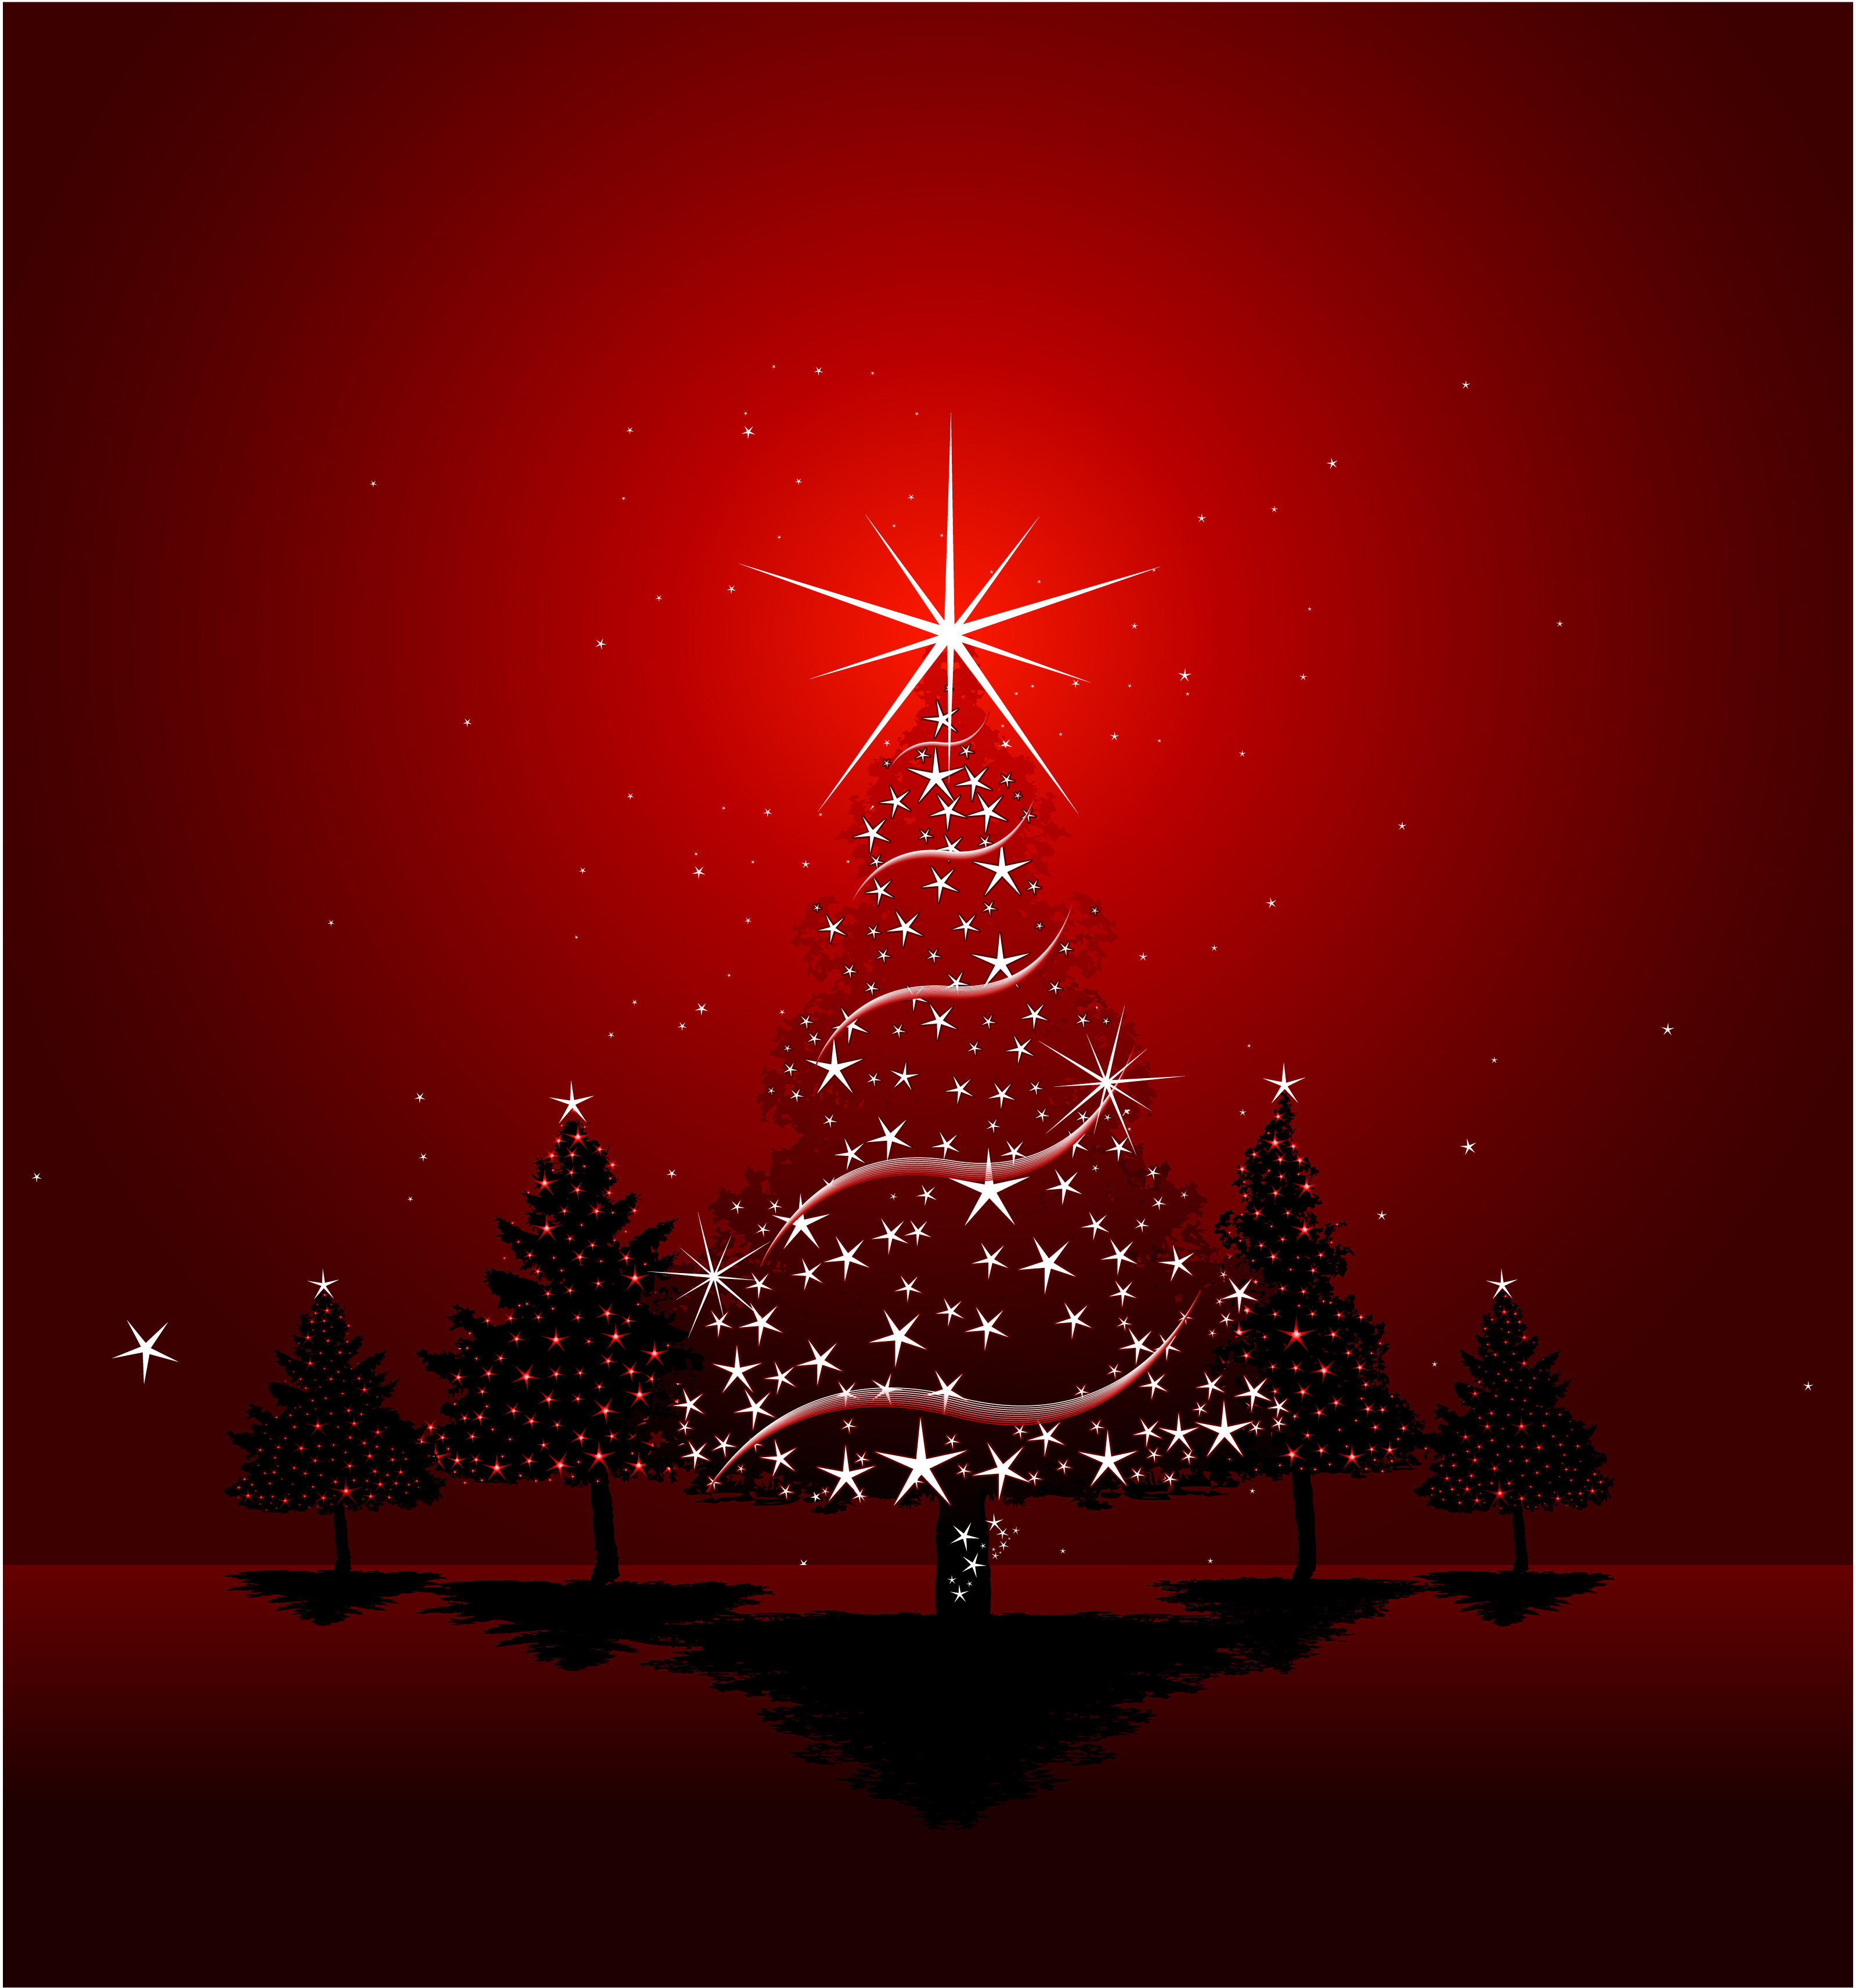 Red Christmas Tree Backgrounds for Powerpoint Templates - PPT Backgrounds Animated Christmas Powerpoint Backgrounds